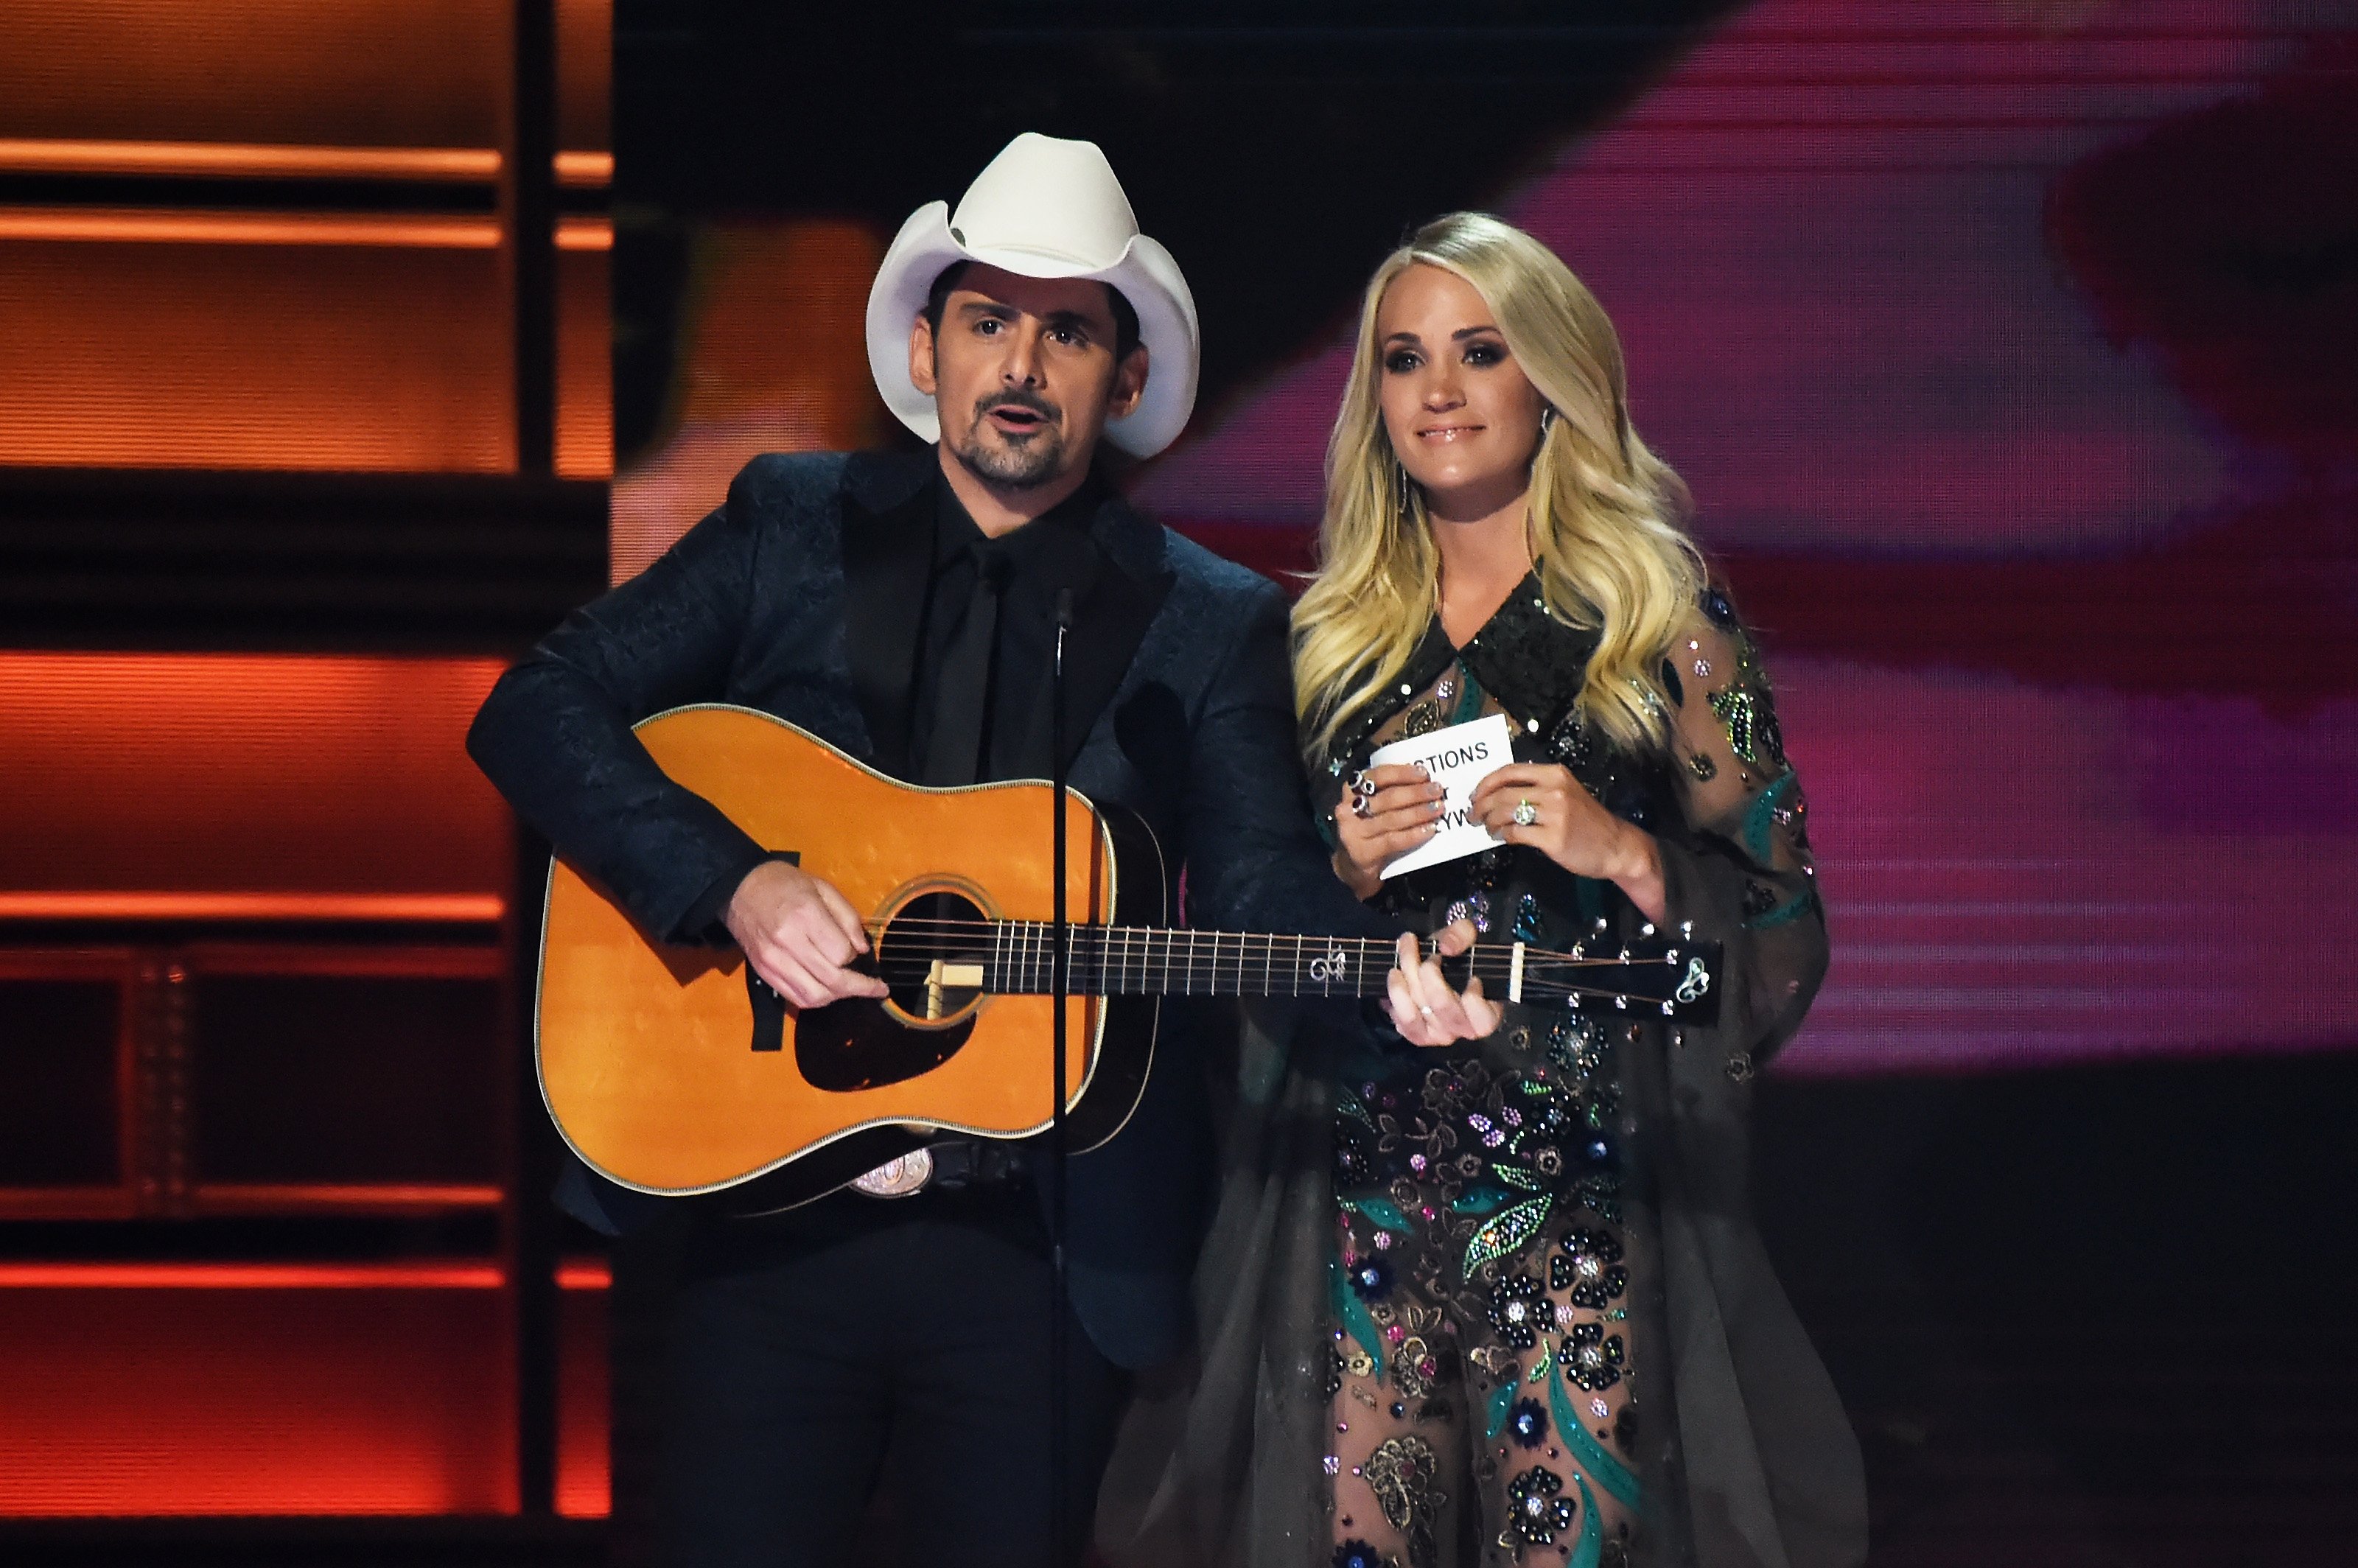 Brad Paisley and Carrie Underwood co-hosting the 51st annual CMA Awards at the Bridgestone Arena on November 8, 2017 in Nashville, Tennessee | Photo: Getty Images